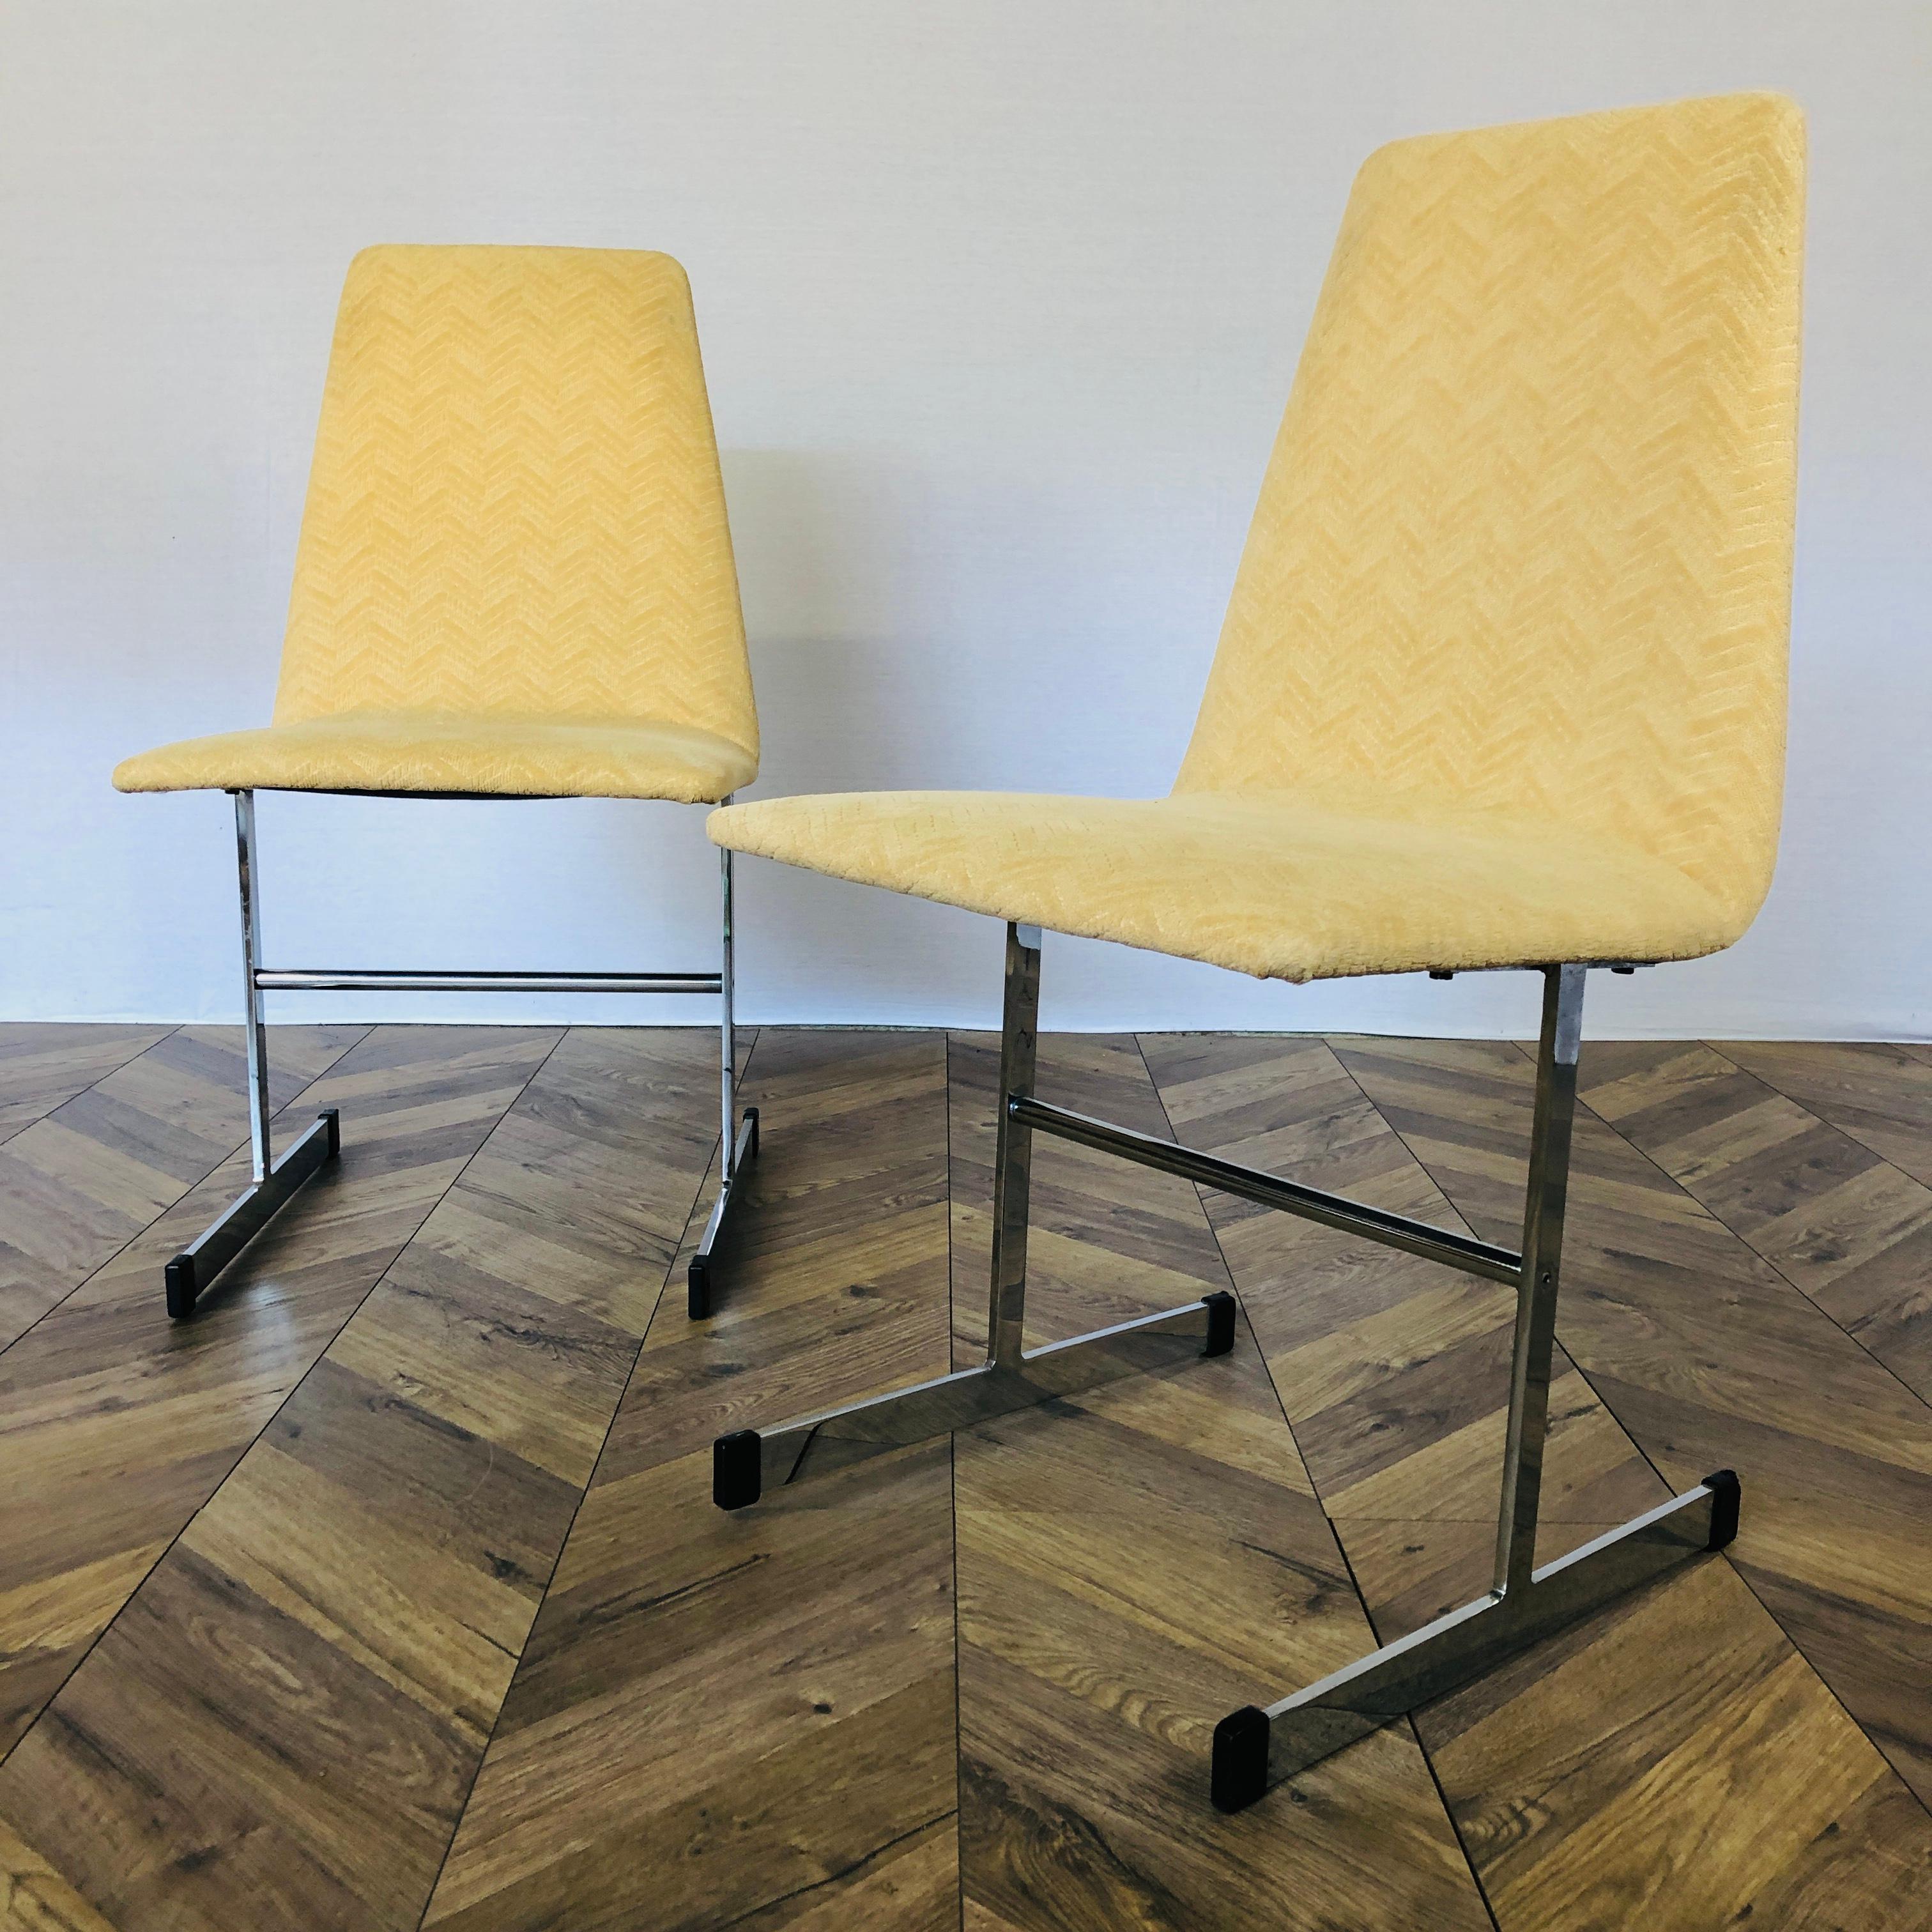 Set of 2, Vintage Mid Century Dining Chairs, Designed by Tim Bates for Pieff’s, Iconic Lisse Range. 

The Chairs feature chrome steel frames with single form seat and backrest set on chromed steel sleigh legs. The upholstery, which is original, is